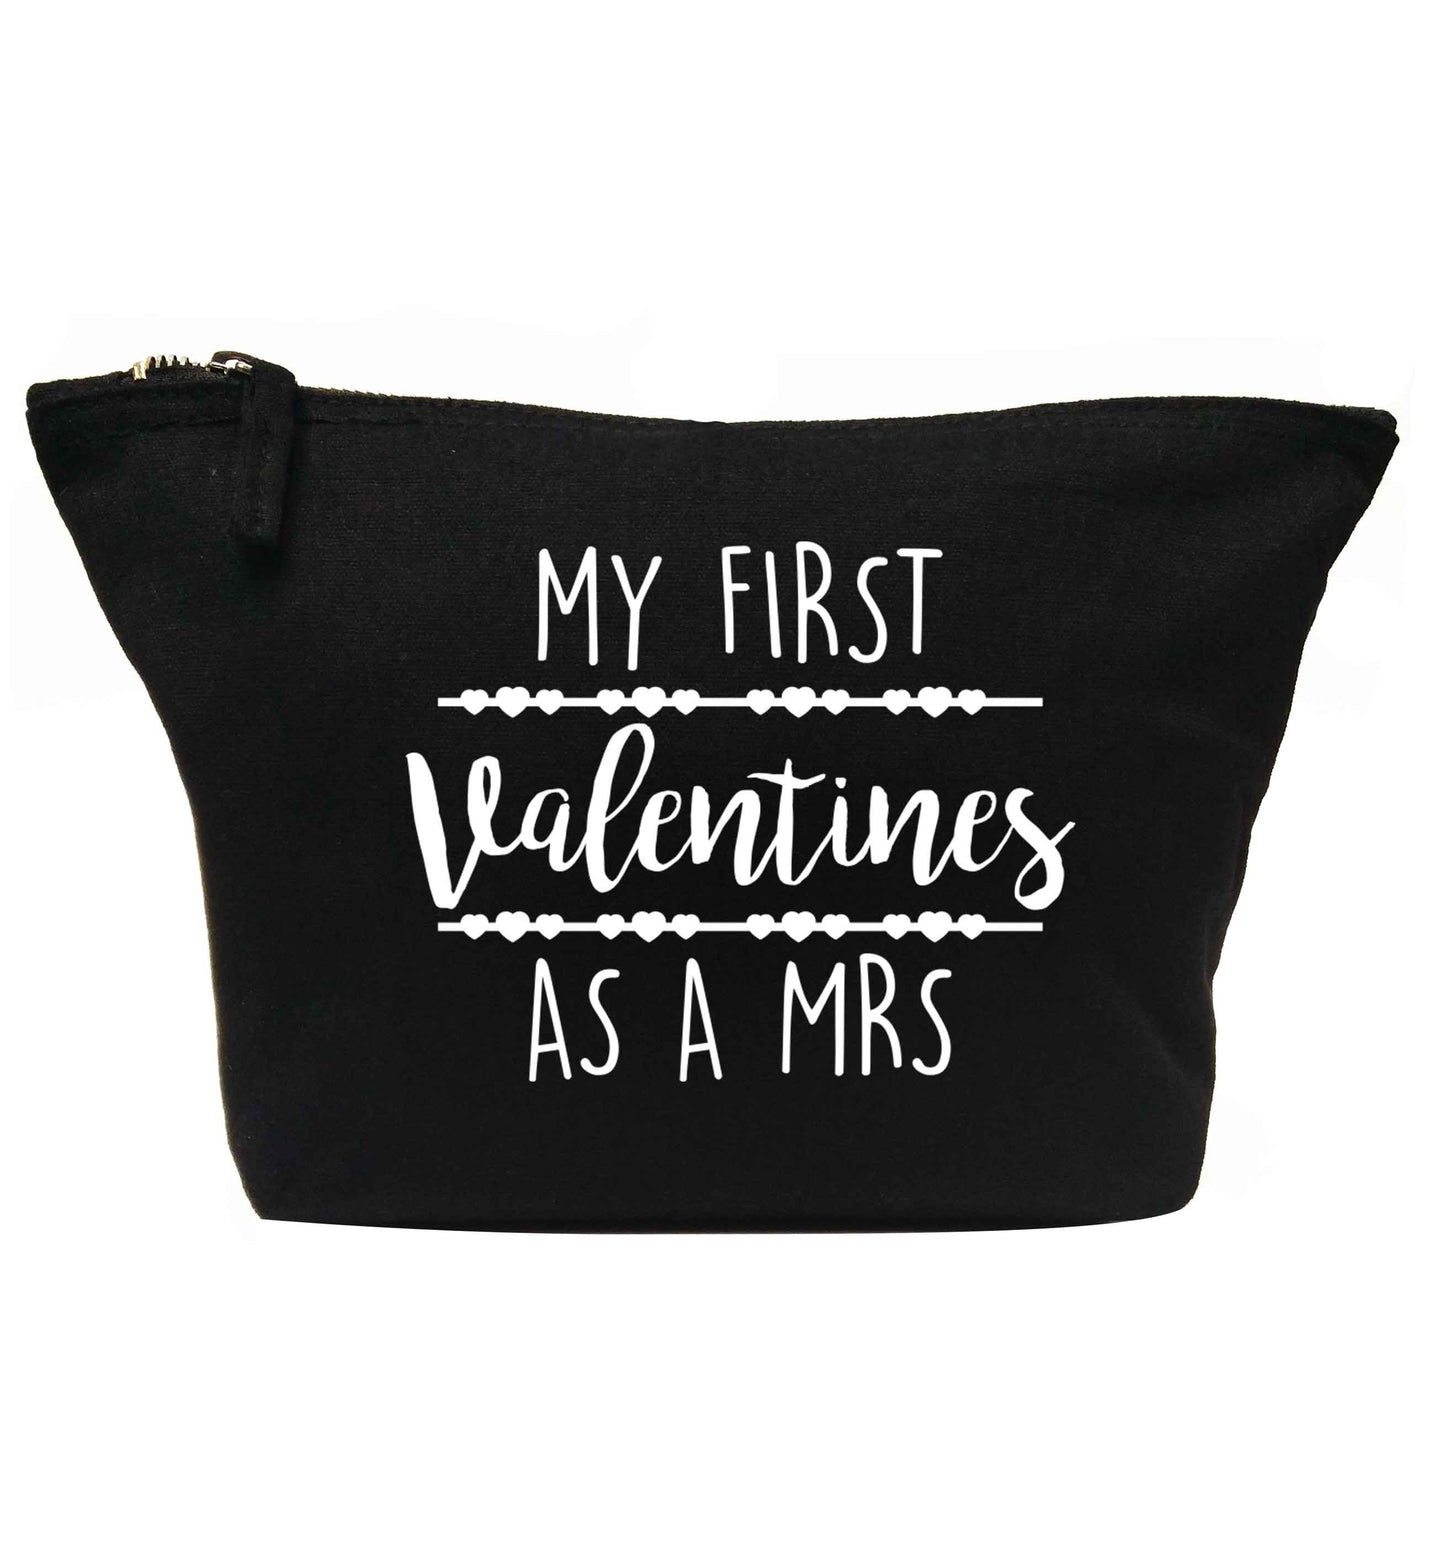 My first valentines as a Mrs | Makeup / wash bag